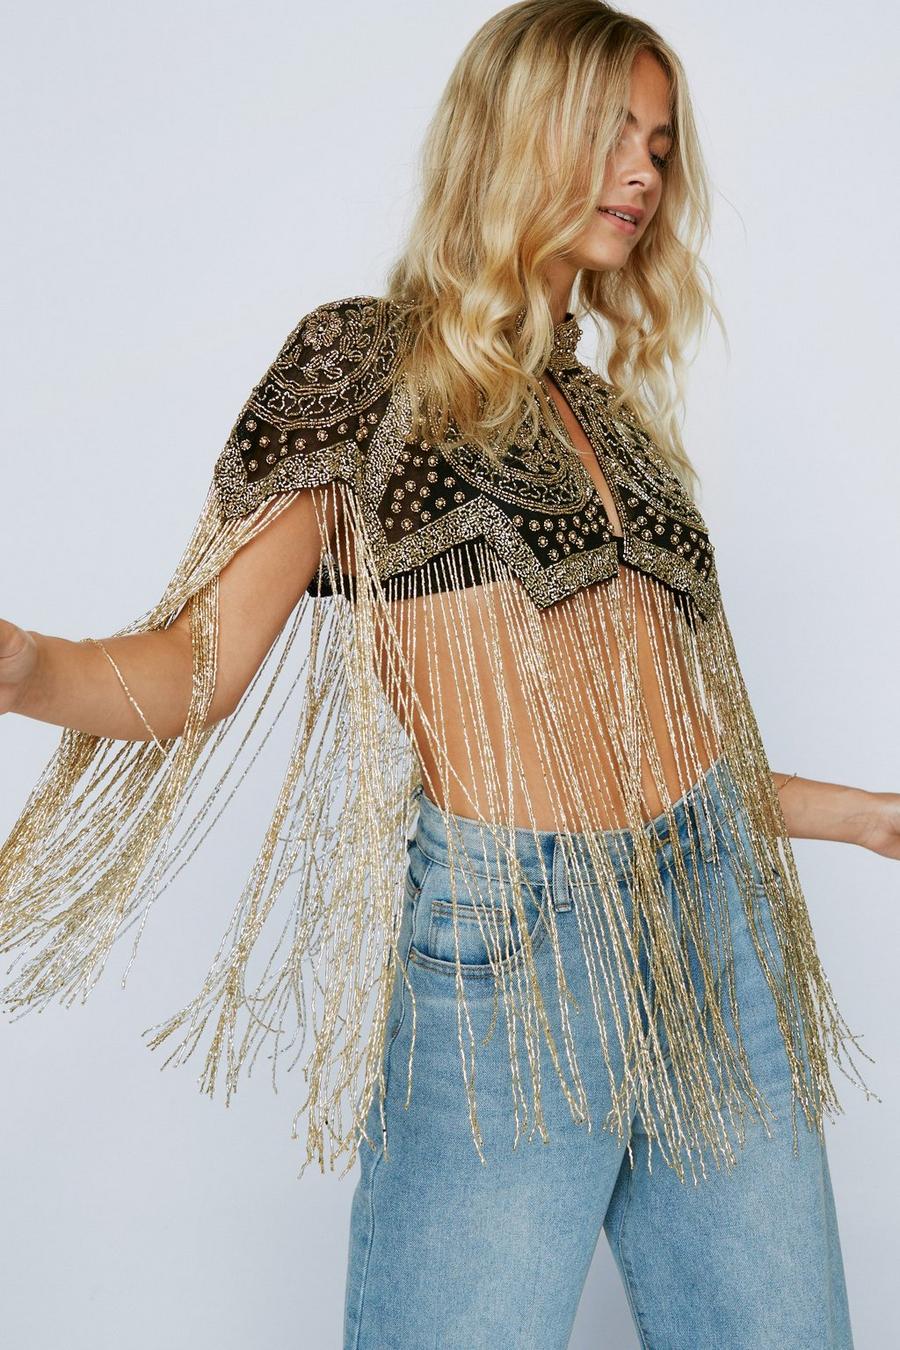 Beaded Cape With Long Tassels